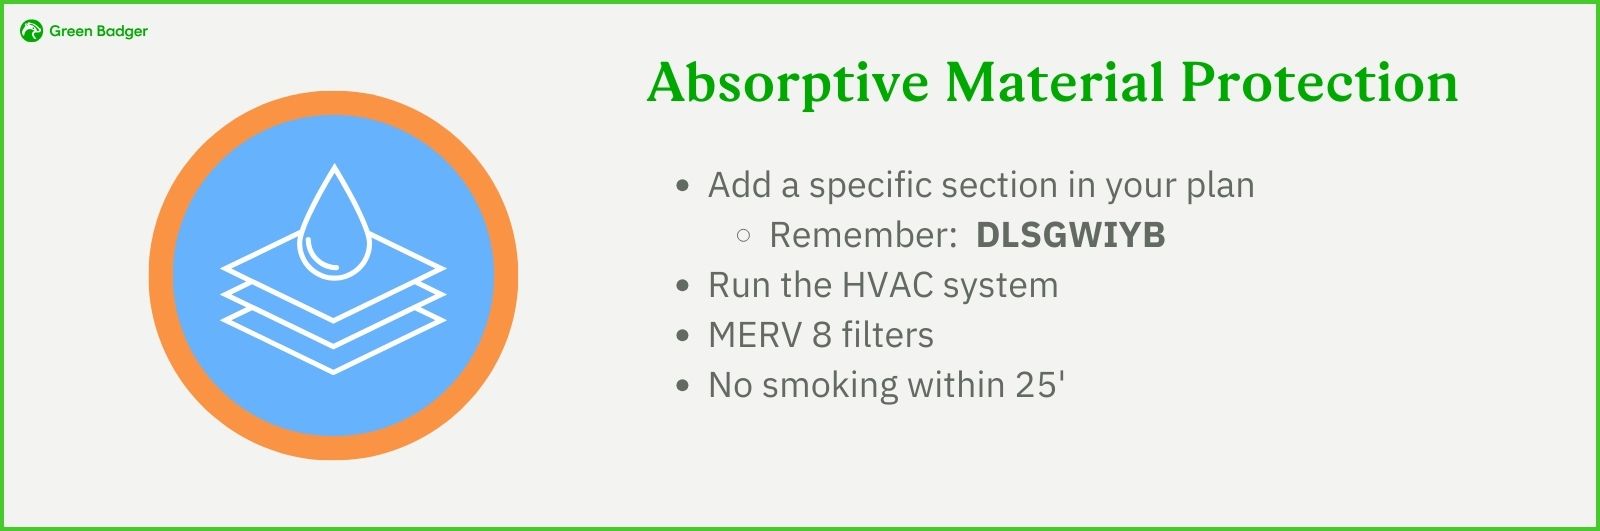 IEQc3 - Absorptive Material